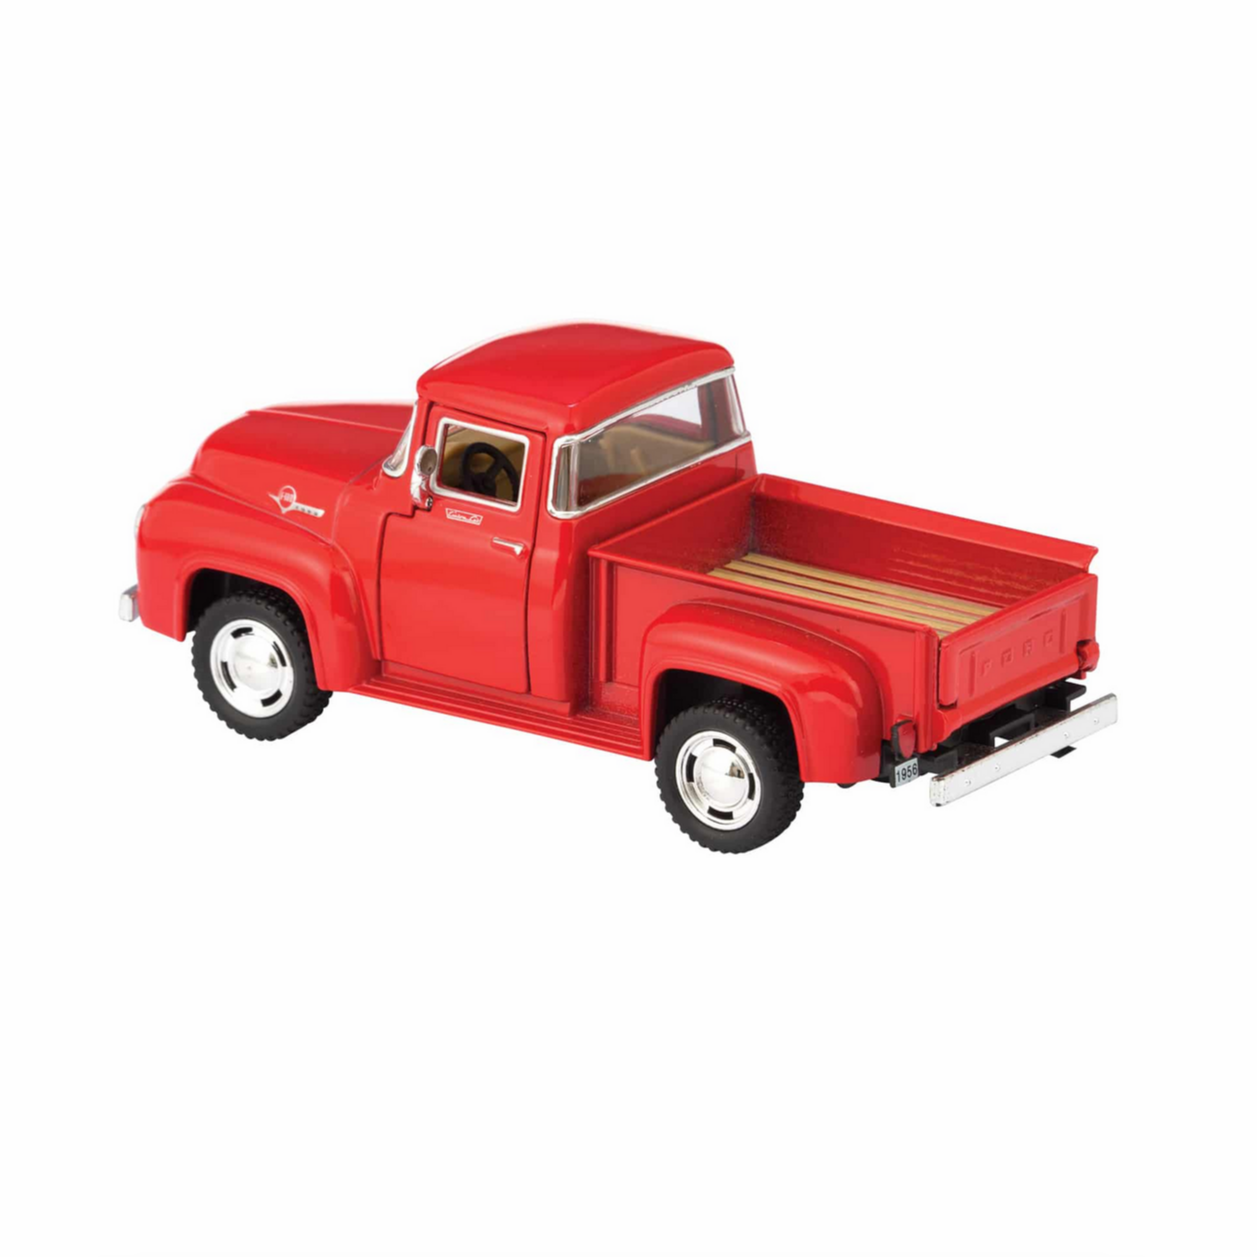 Diecast 56′ Ford Pick Up Truck 3yrs+